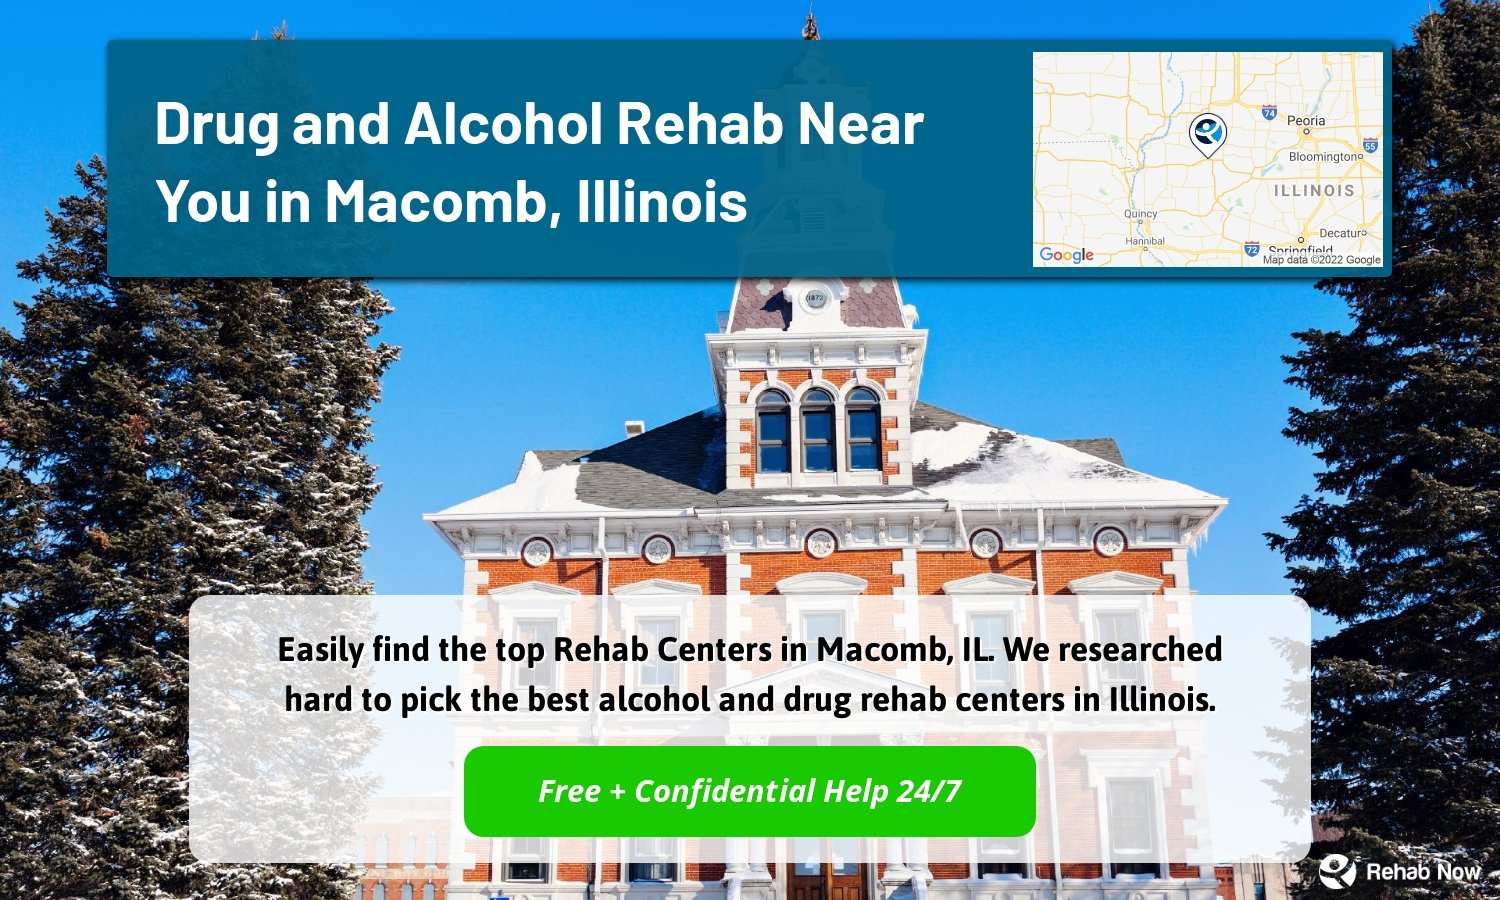 Easily find the top Rehab Centers in Macomb, IL. We researched hard to pick the best alcohol and drug rehab centers in Illinois.